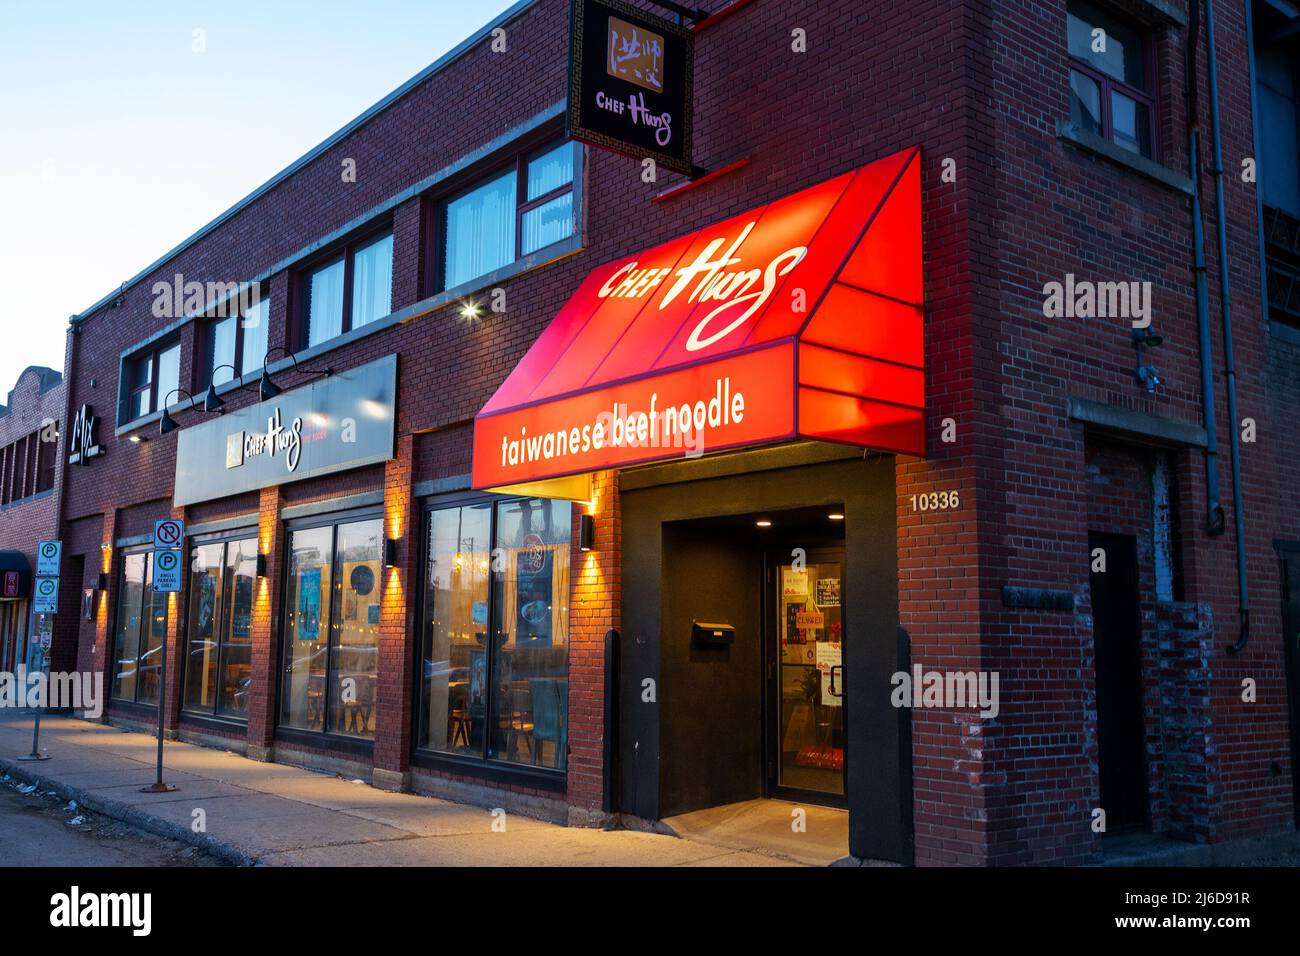 EDMONTON, CANADA - APRIL 17, 2022: Storefront of Chef Hung restaurant in Strathcona, Edmonton, Alberta. Since 2011, the famous Taiwanese beef noodle r Stock Photo